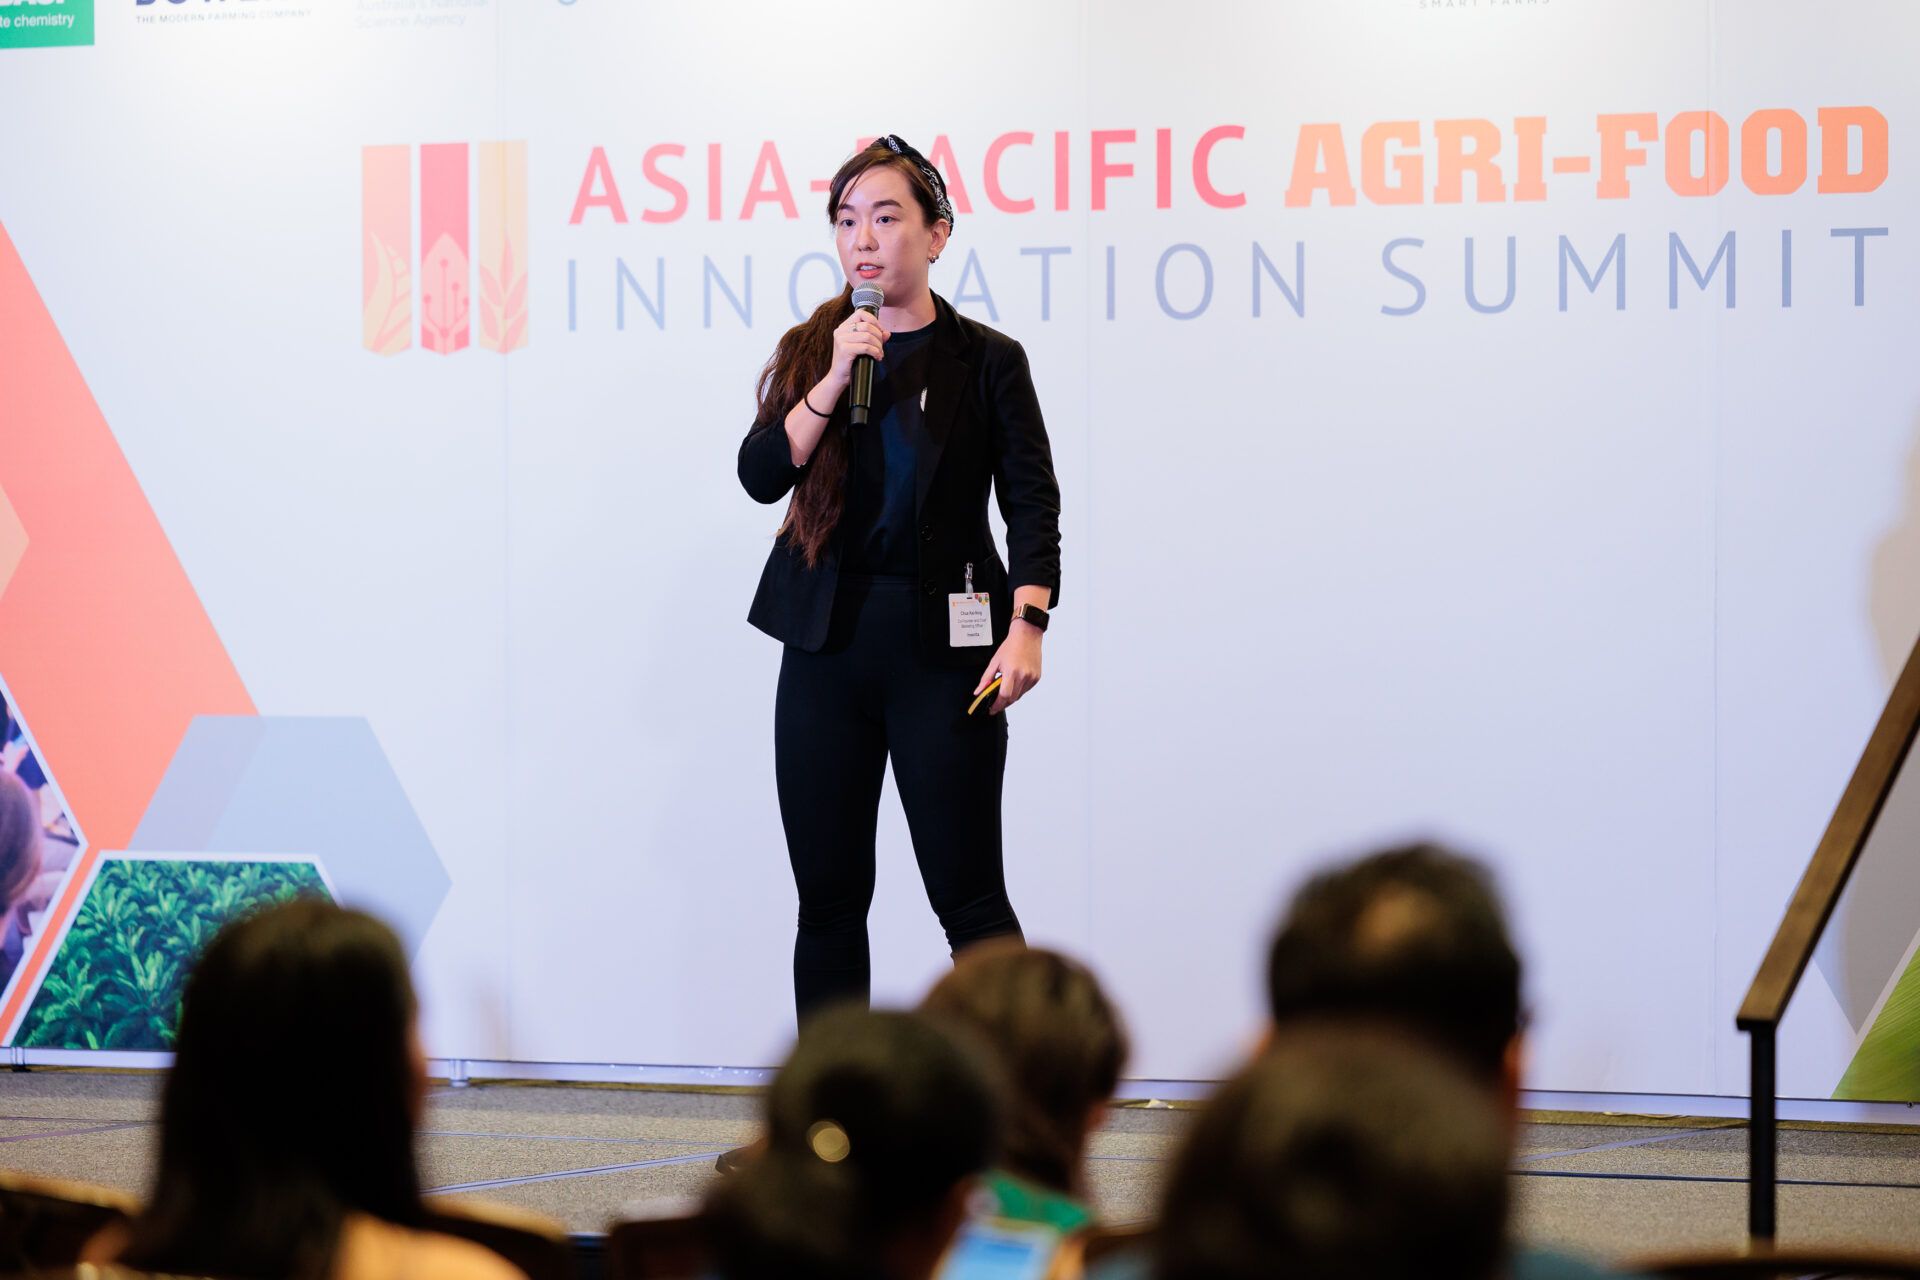 30 agrifoodtech startups will showcase their wares at the Asia-Pacific Agri-Food Innovation Summit in Singapore, Oct 31-Nov 2.